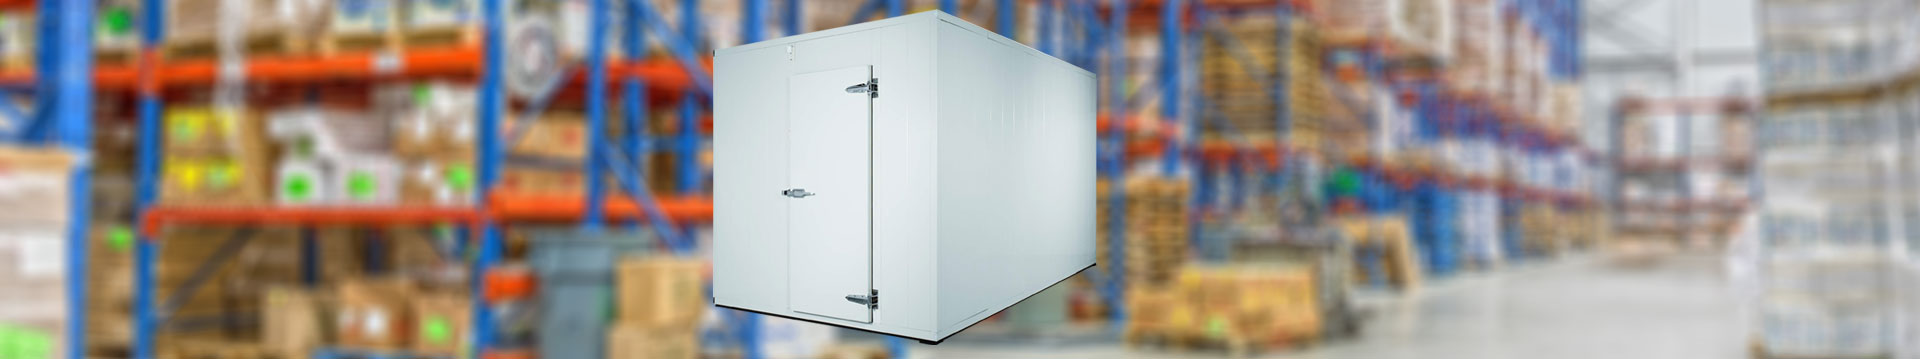 Dry Equipment | Refrigeration Unit For Cold Room